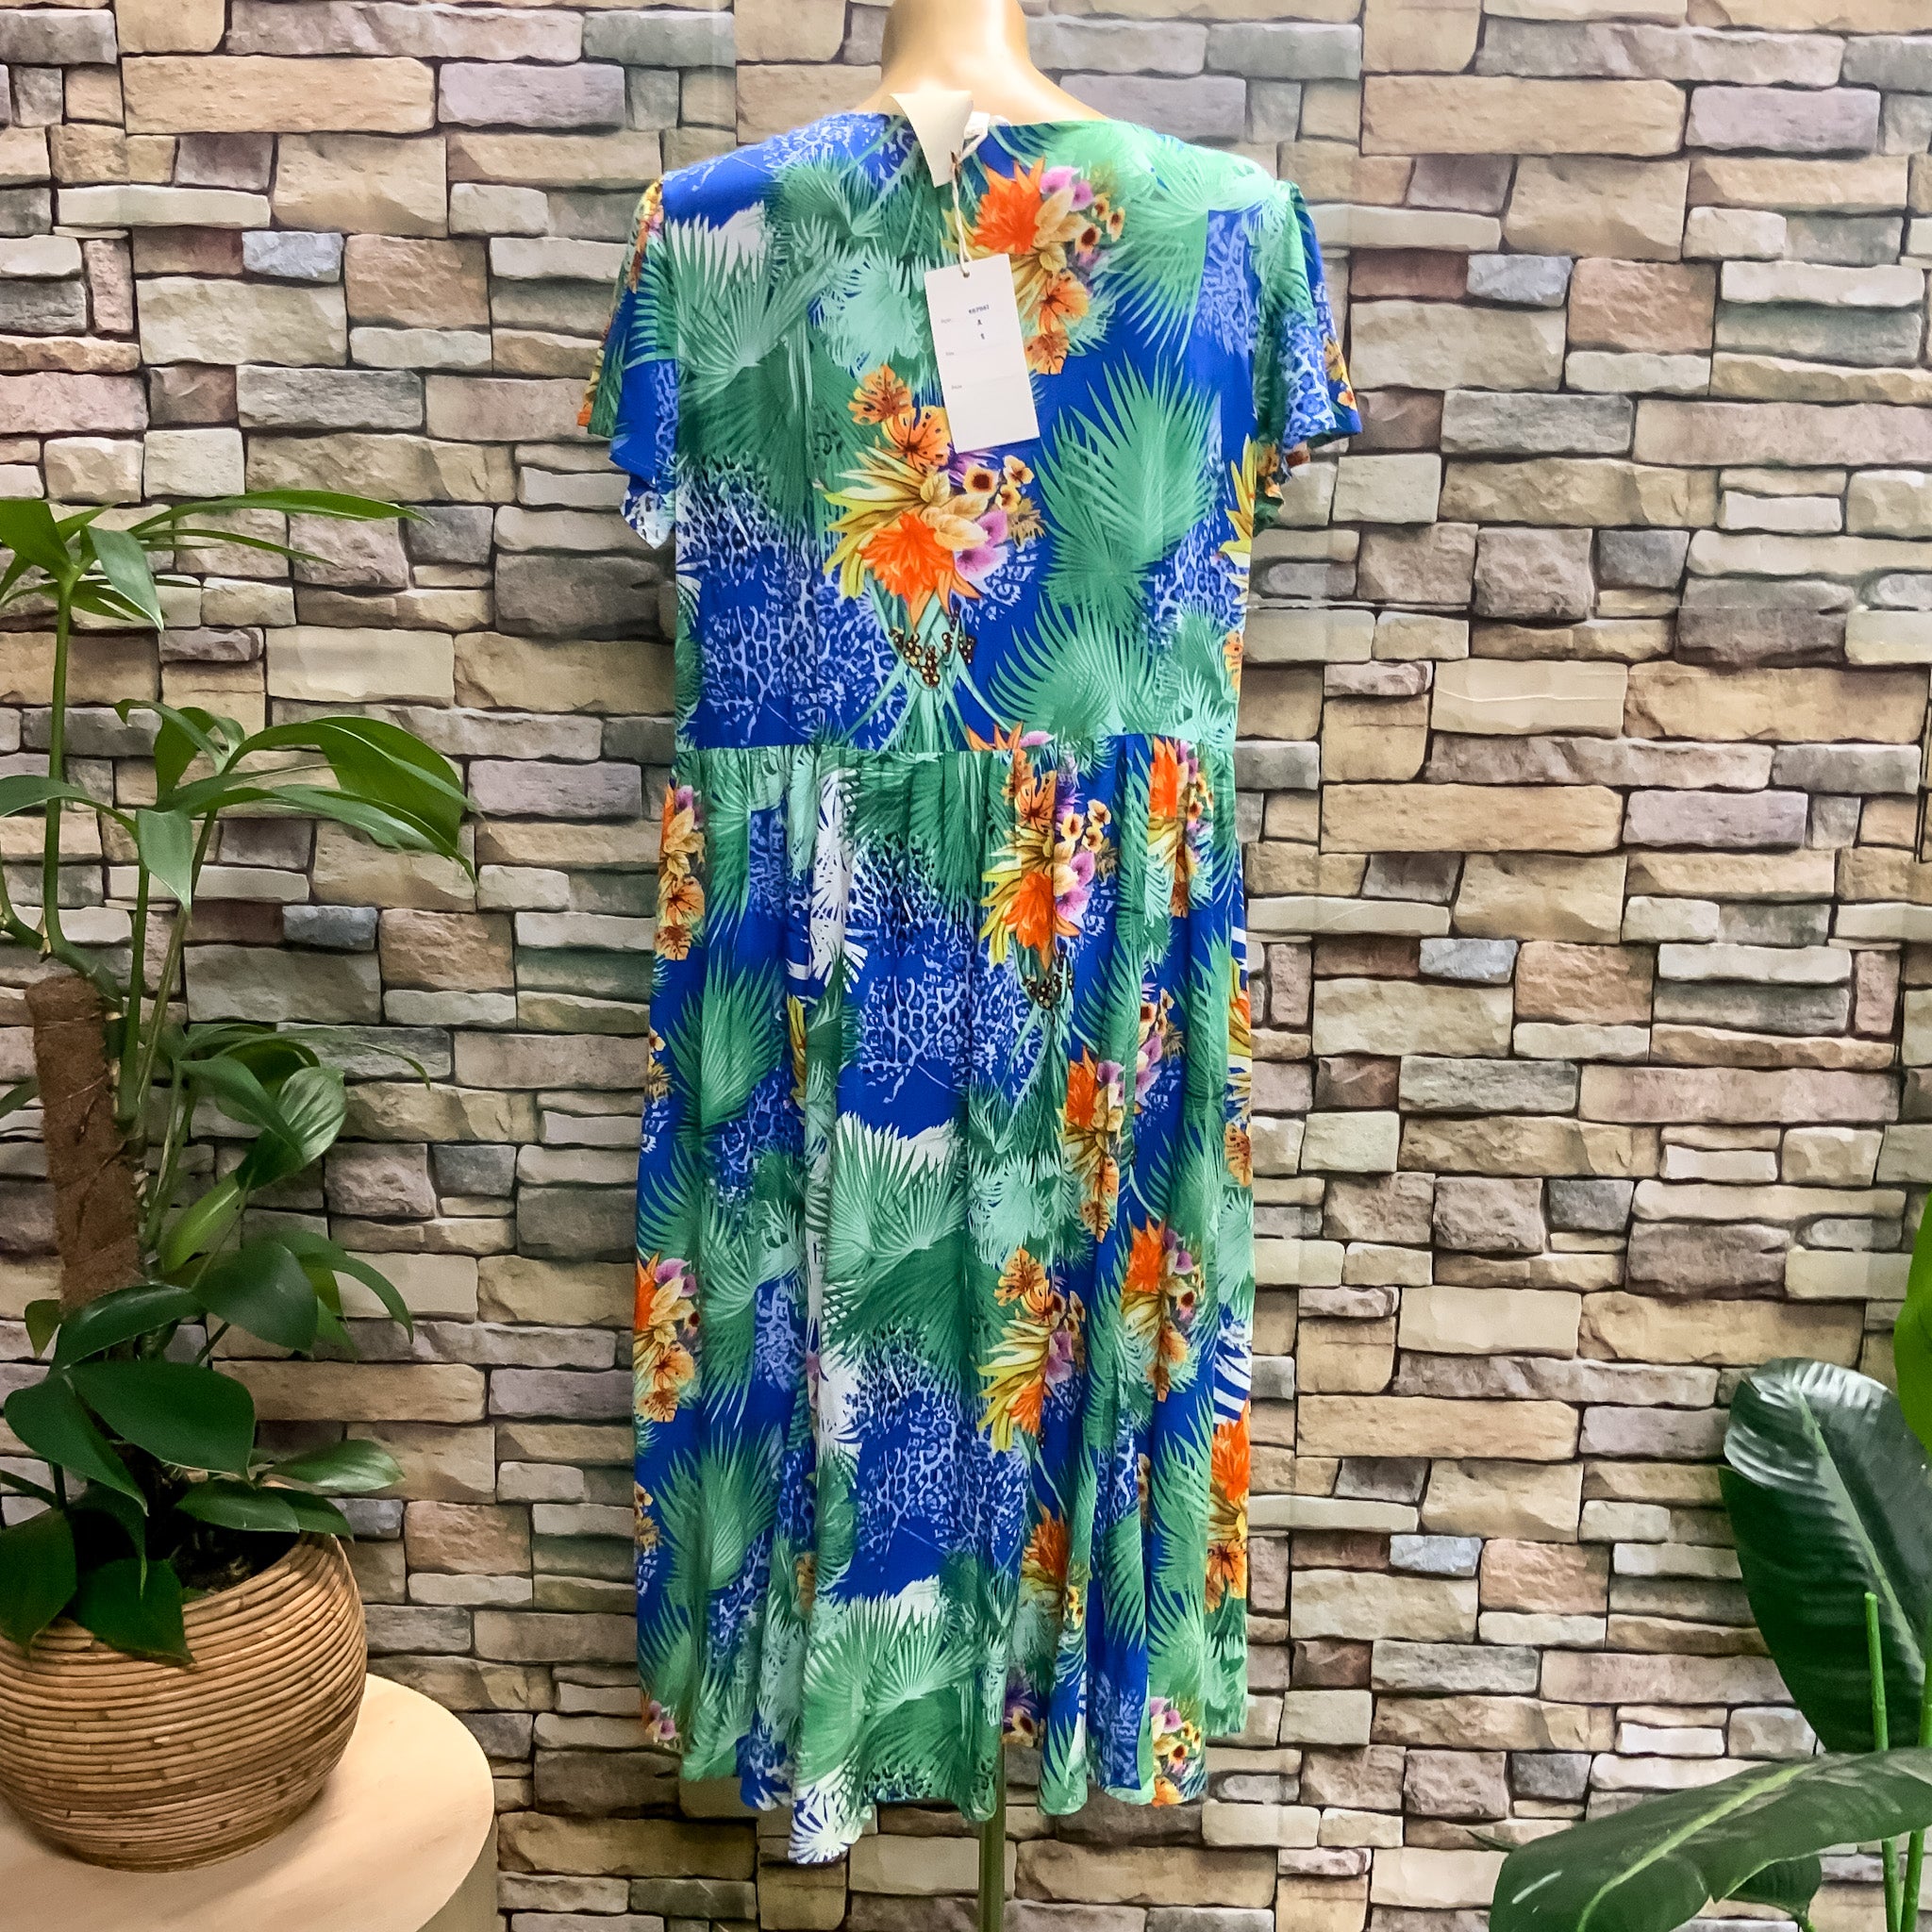 BNWT NEW COLLECTION Tropical Print Midi Dress - Size S